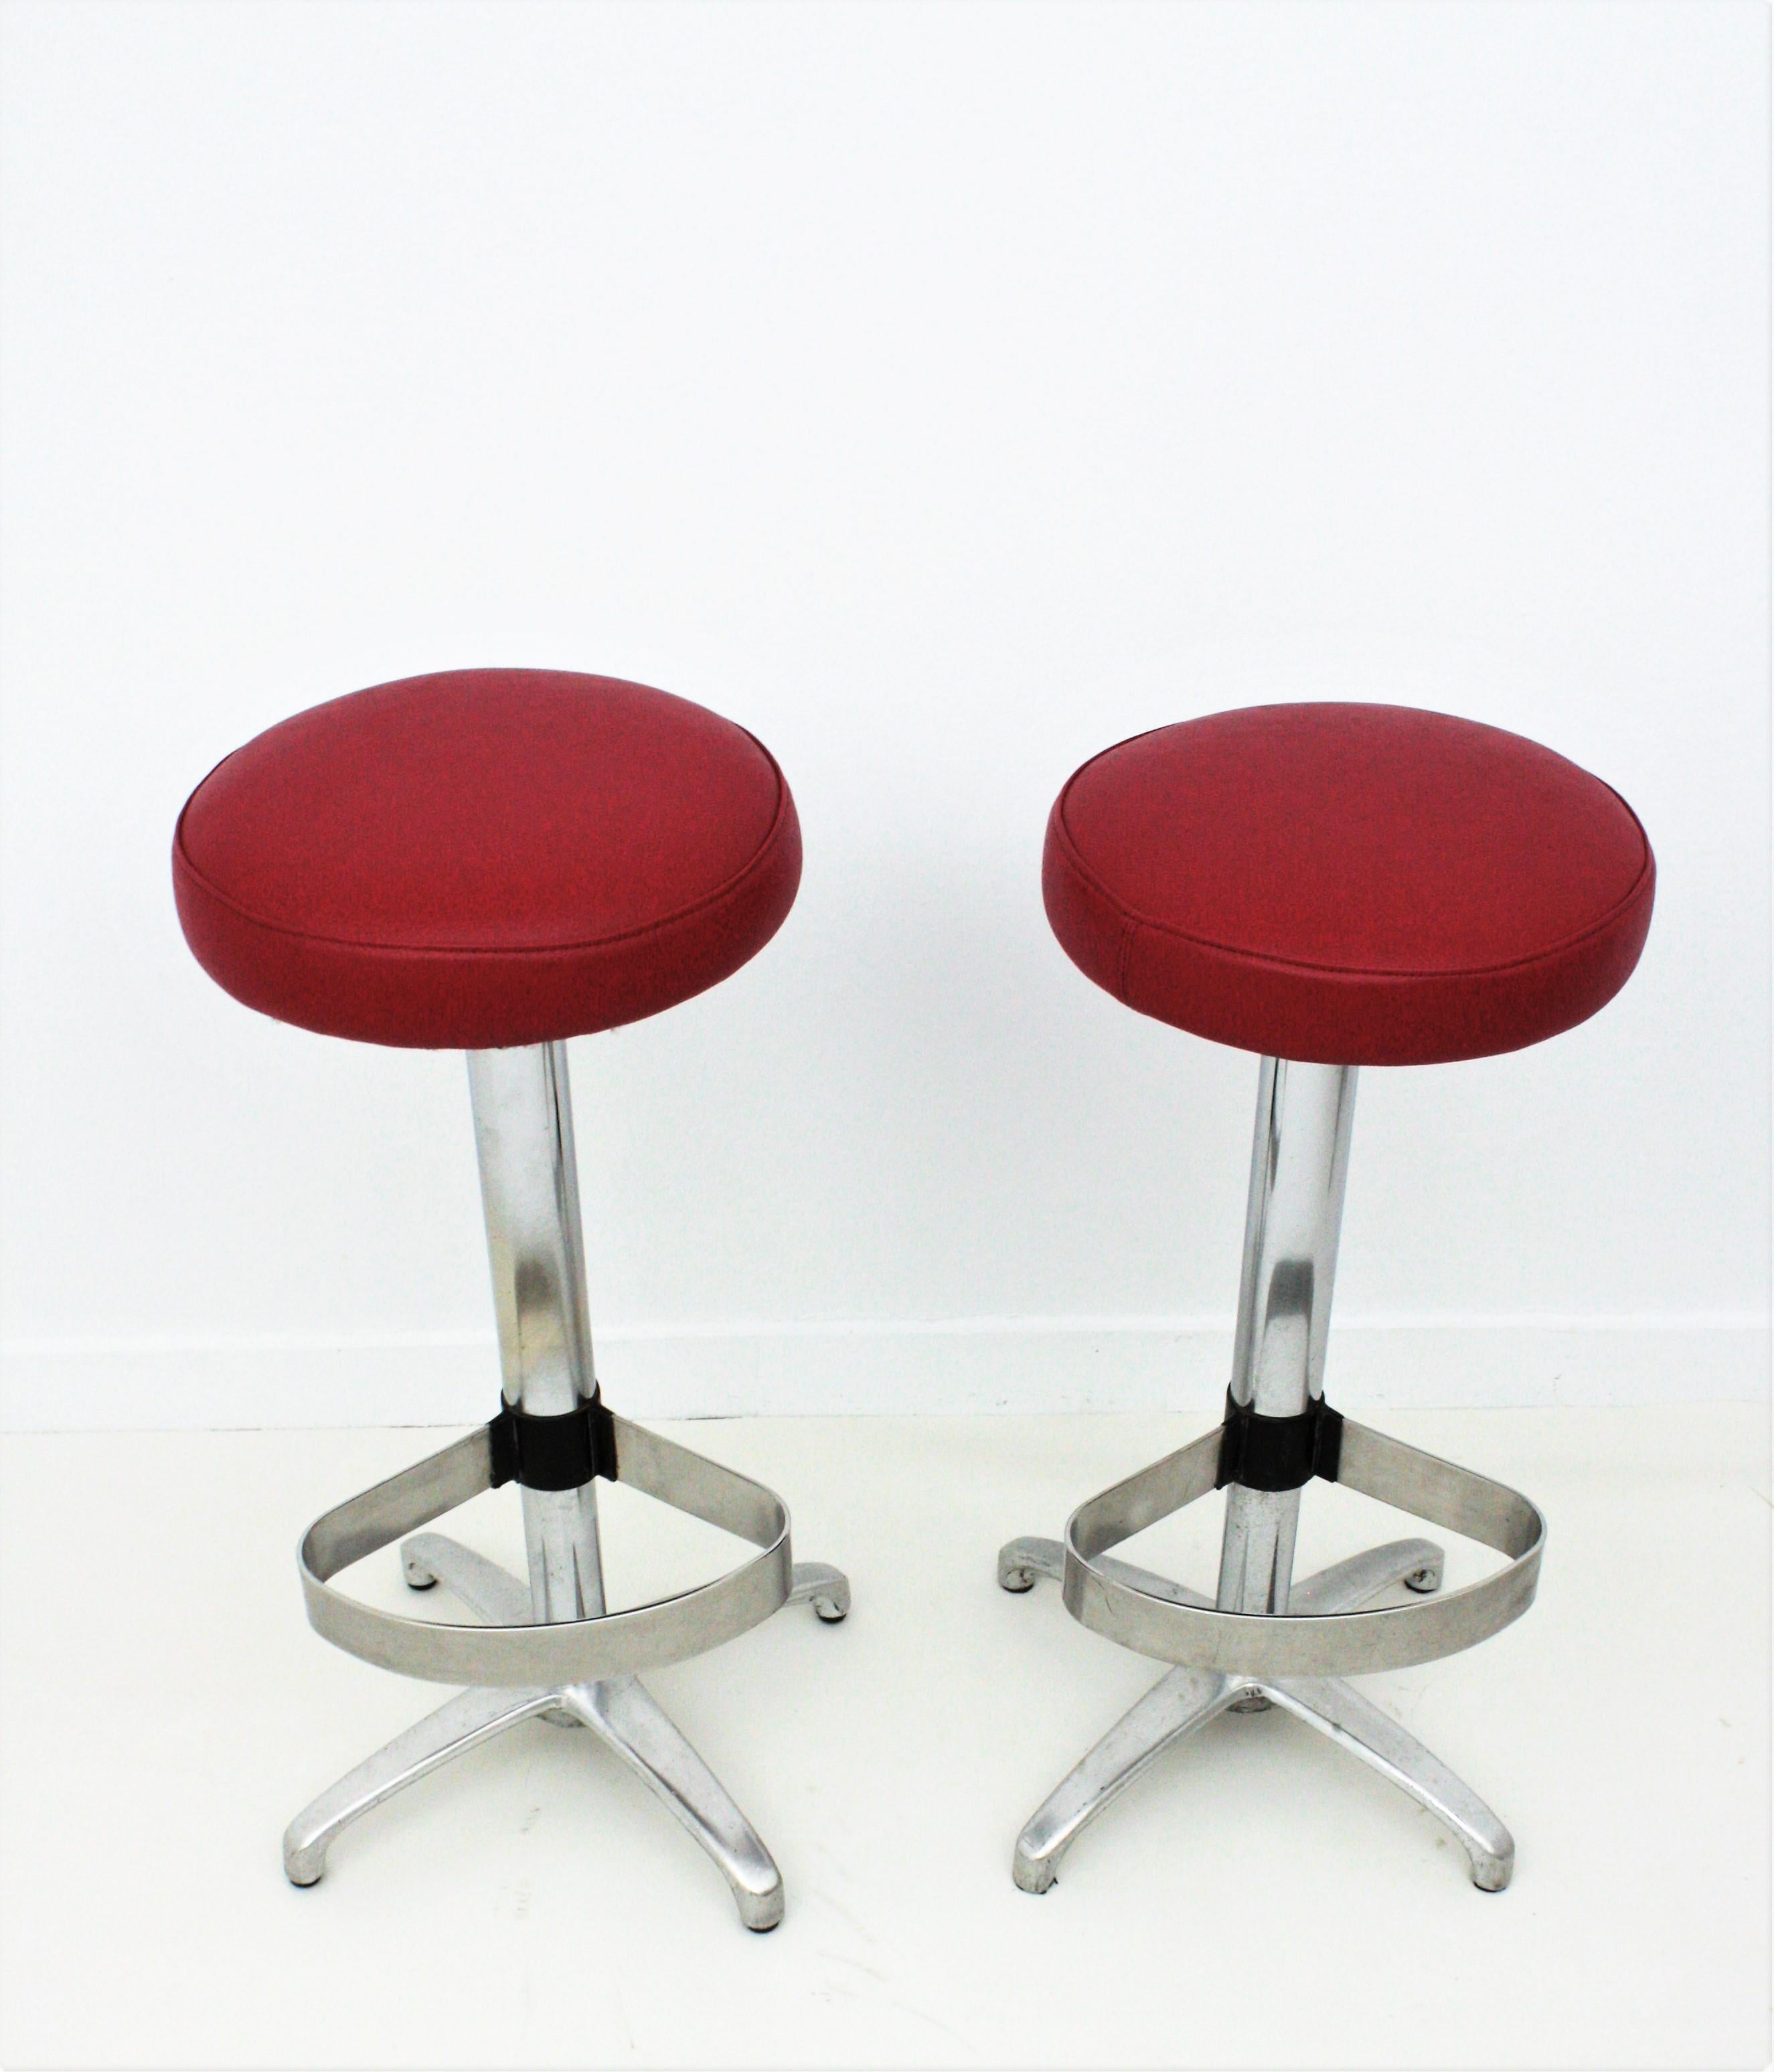 Four Midcentury Bar Stools in Metal Upholstered in Red Leatherette For Sale 3